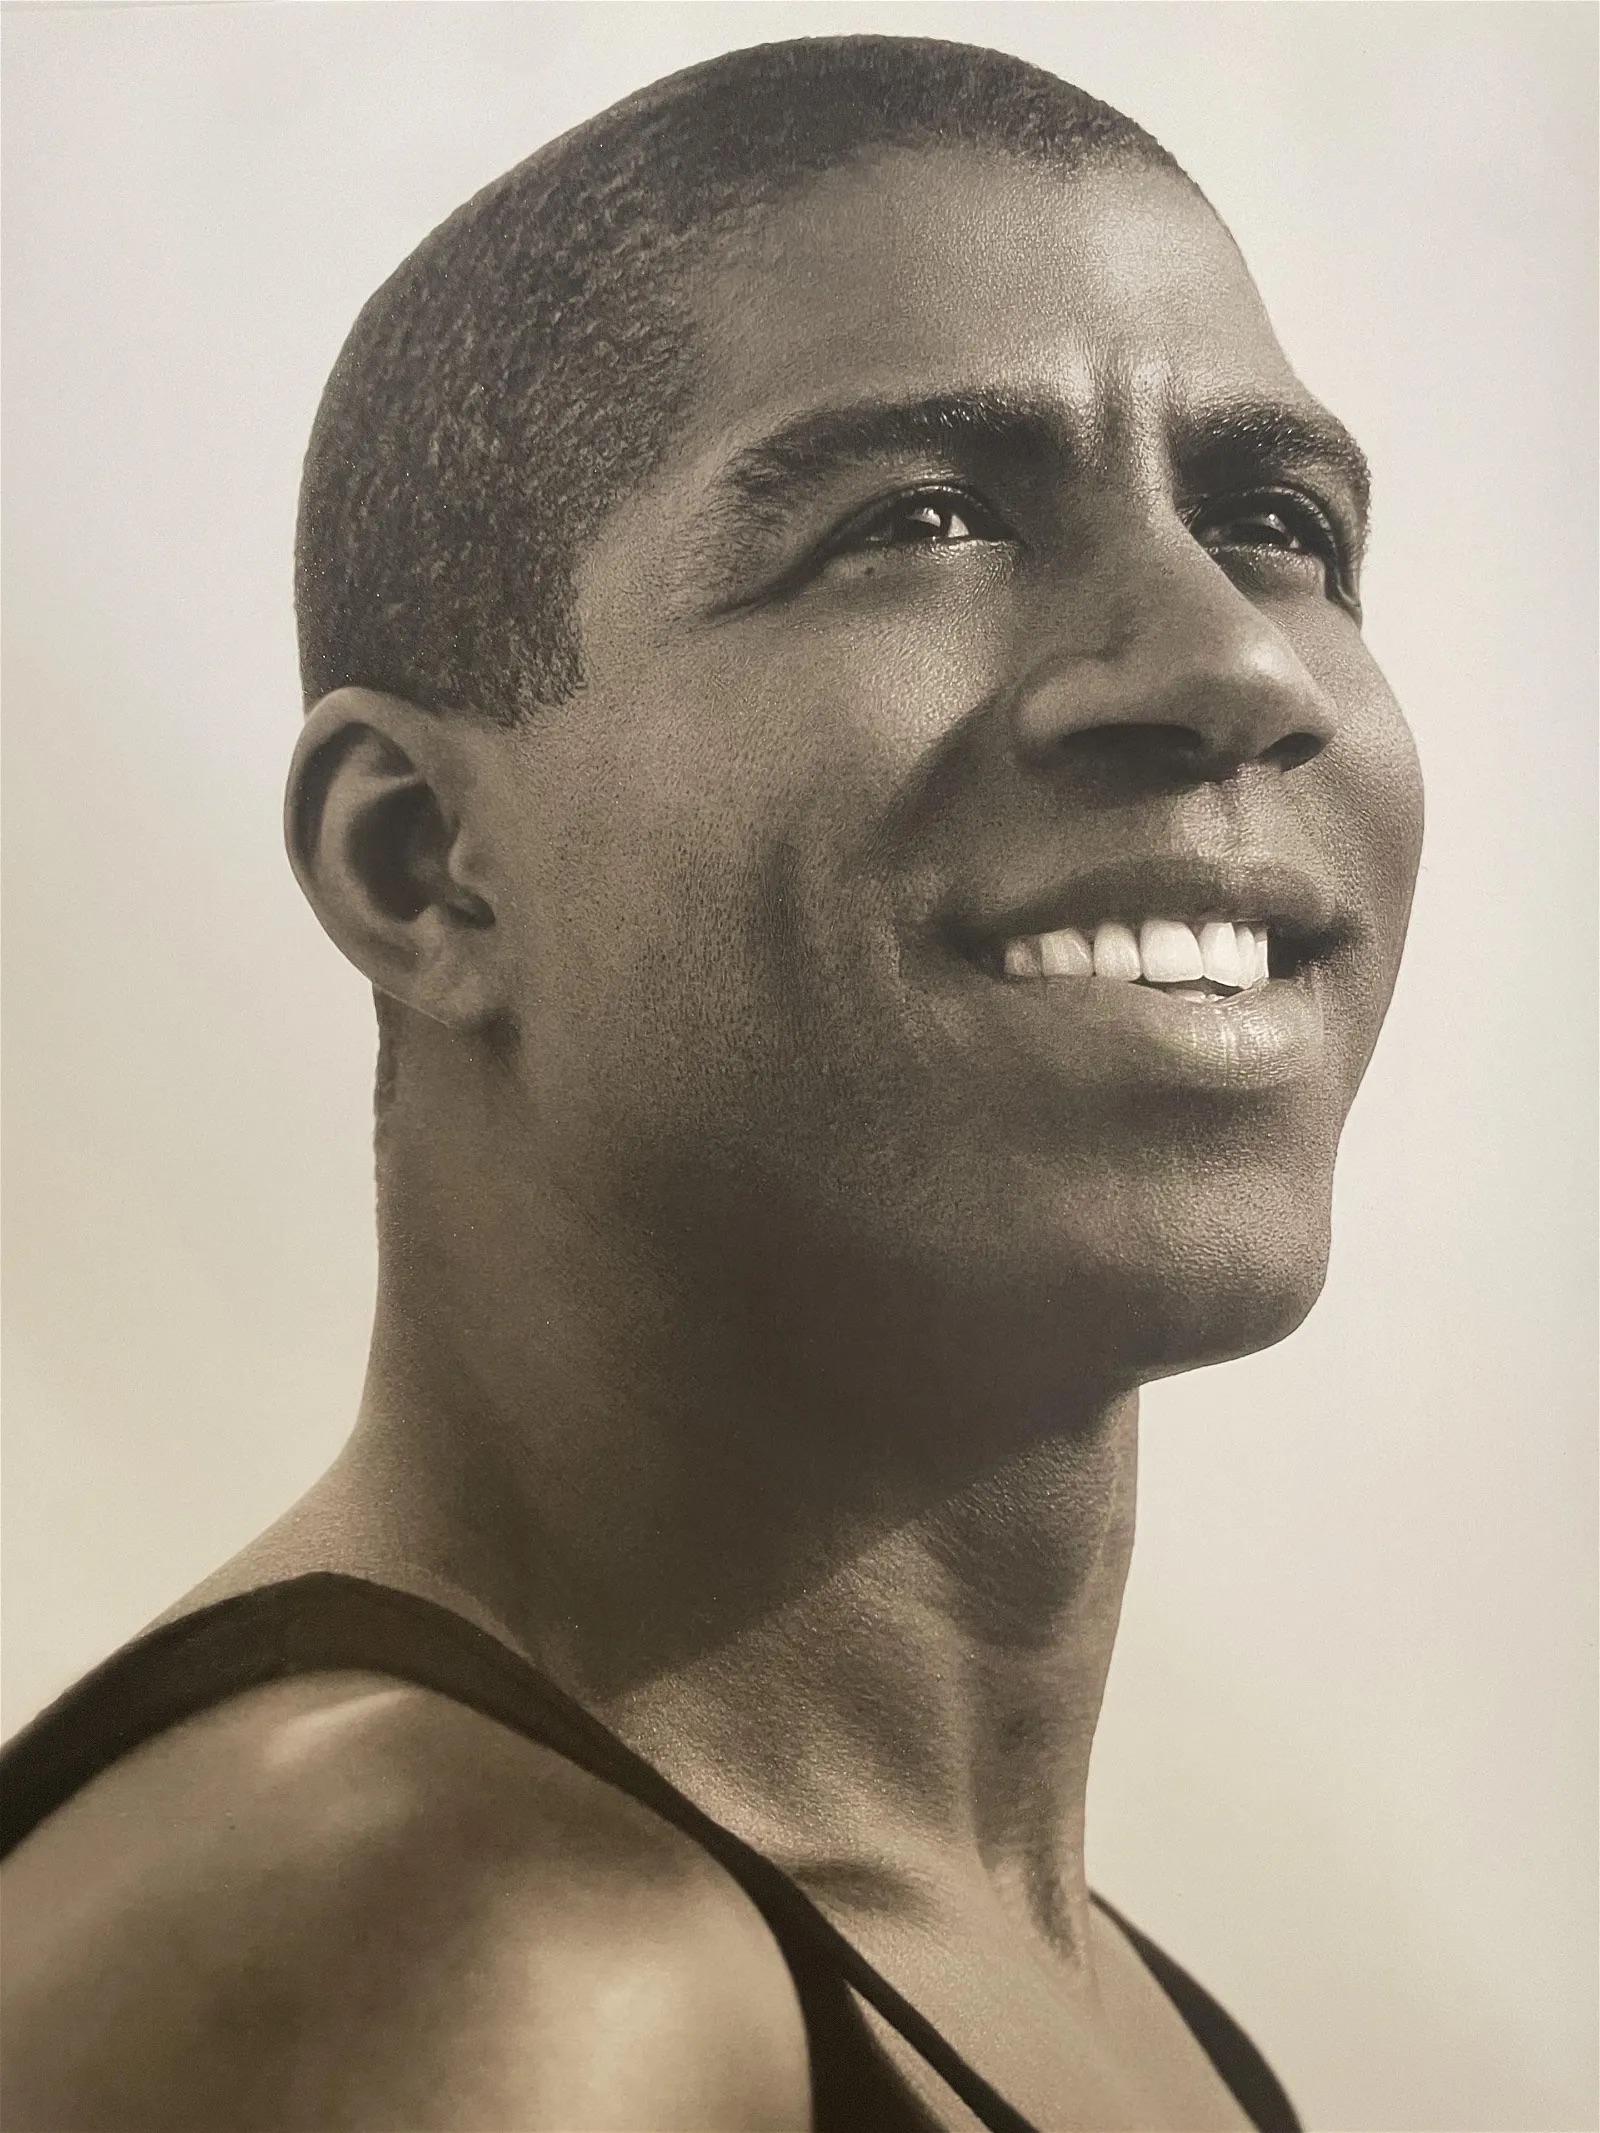 Herb Ritts "Earvin Magic Johnson, Hollywood, 1992" Print - Image 2 of 6